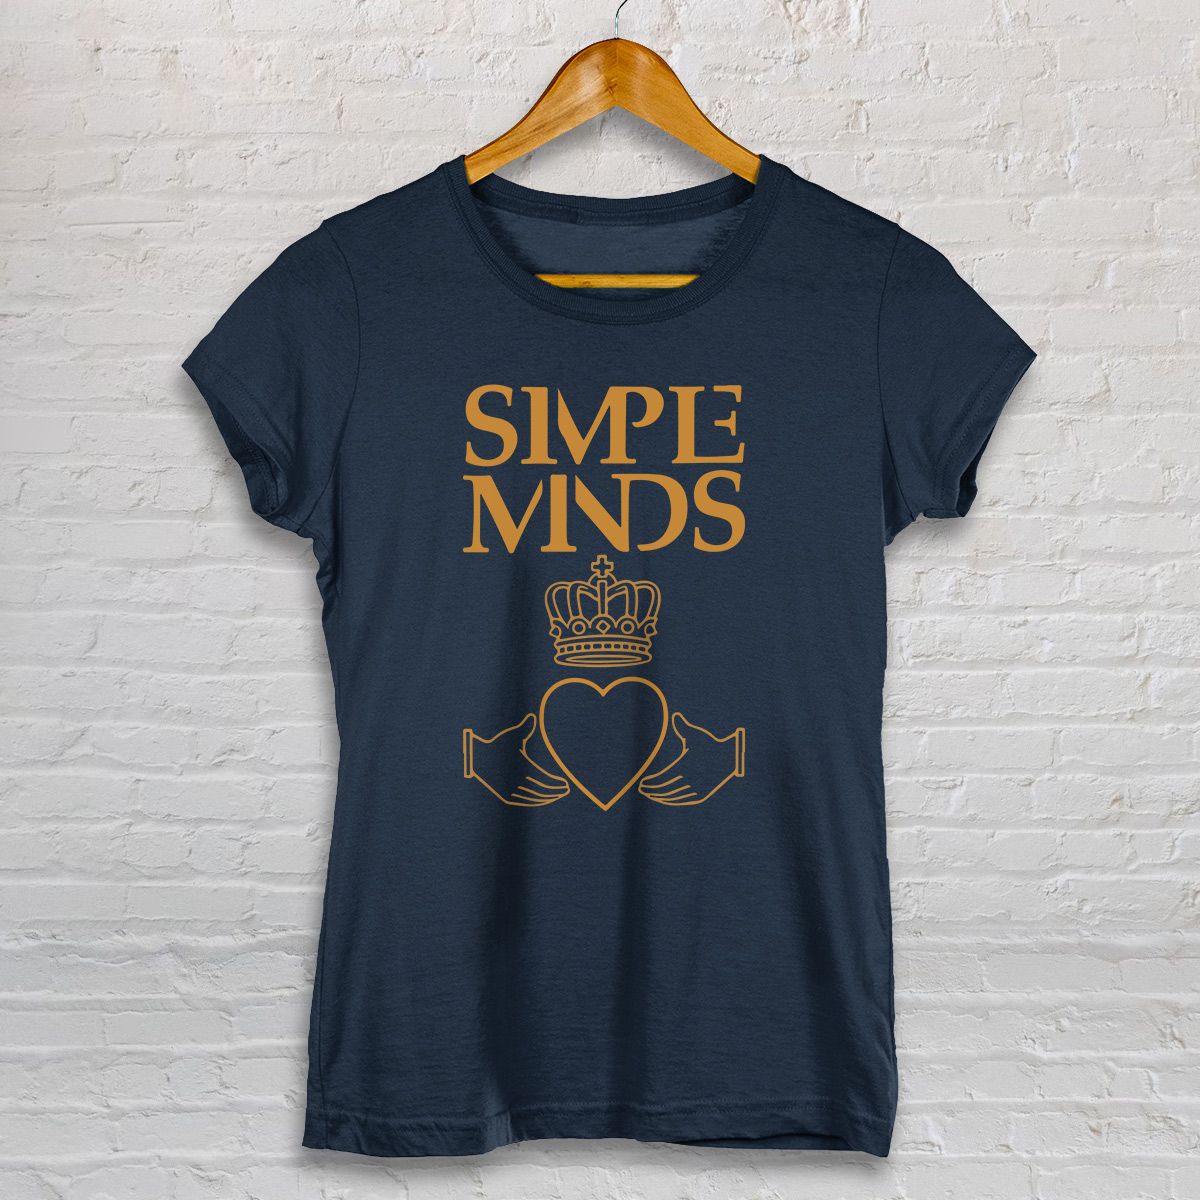 Nome do produto: BABY LOOK - SIMPLE MINDS